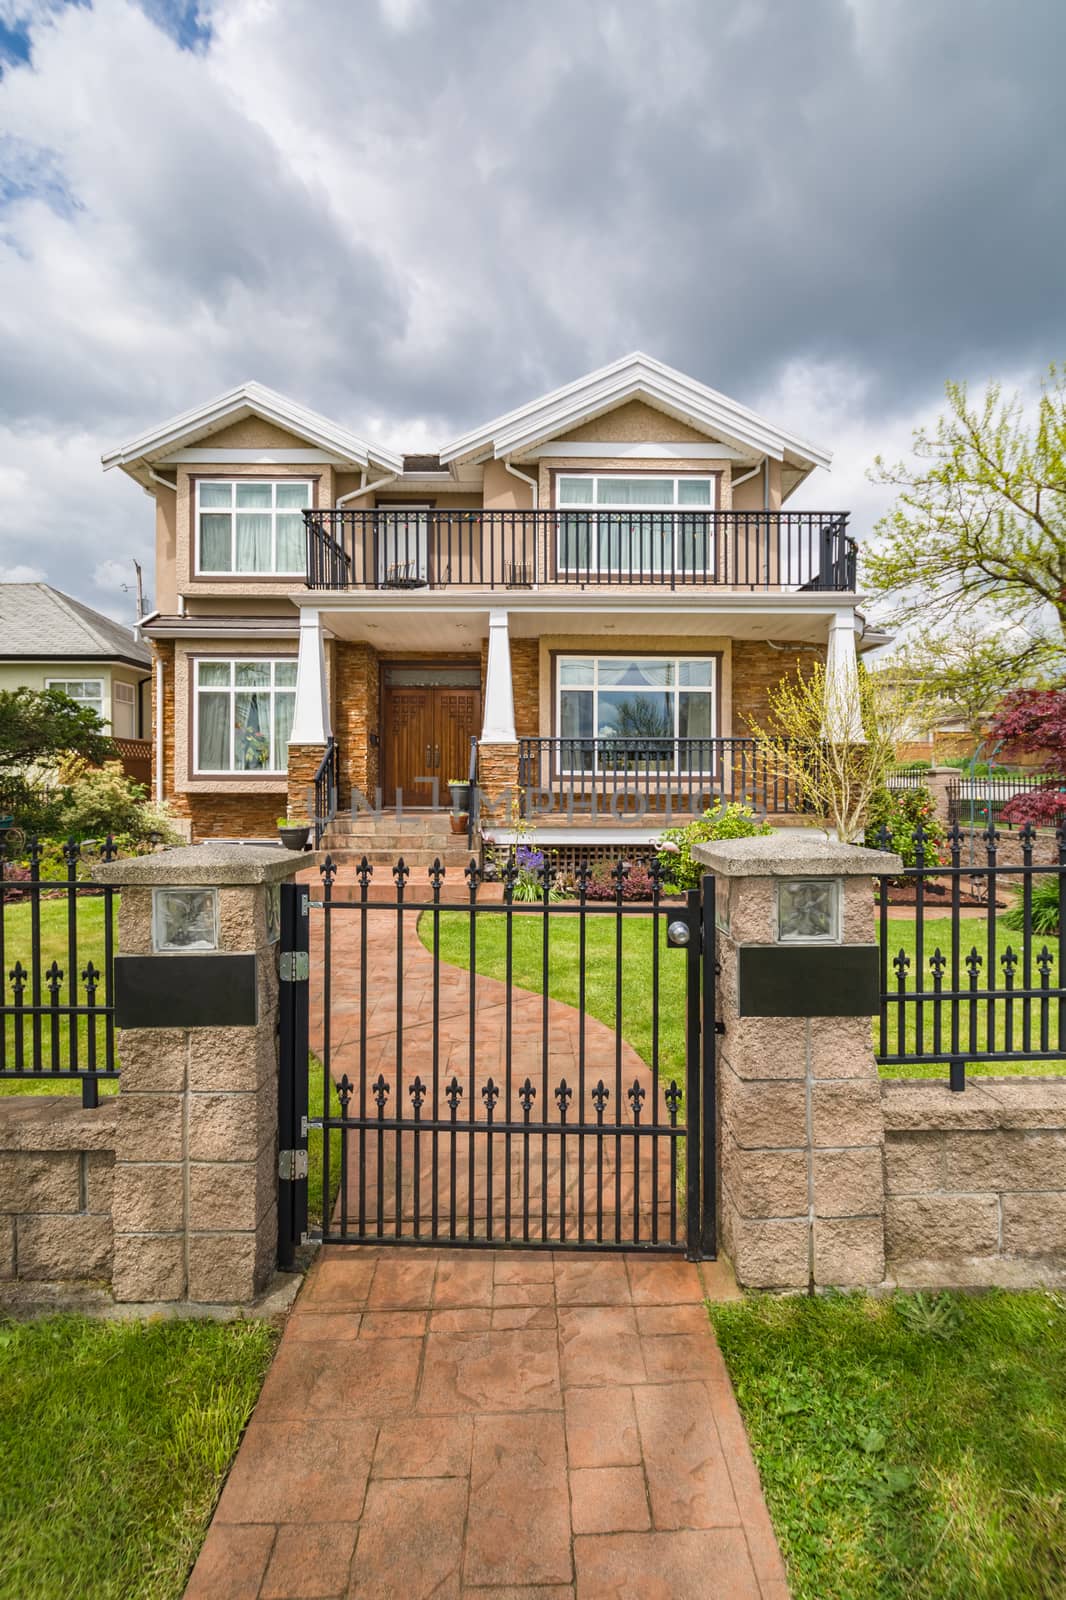 Luxury residential house with green lawn on the front yard behind metal fence